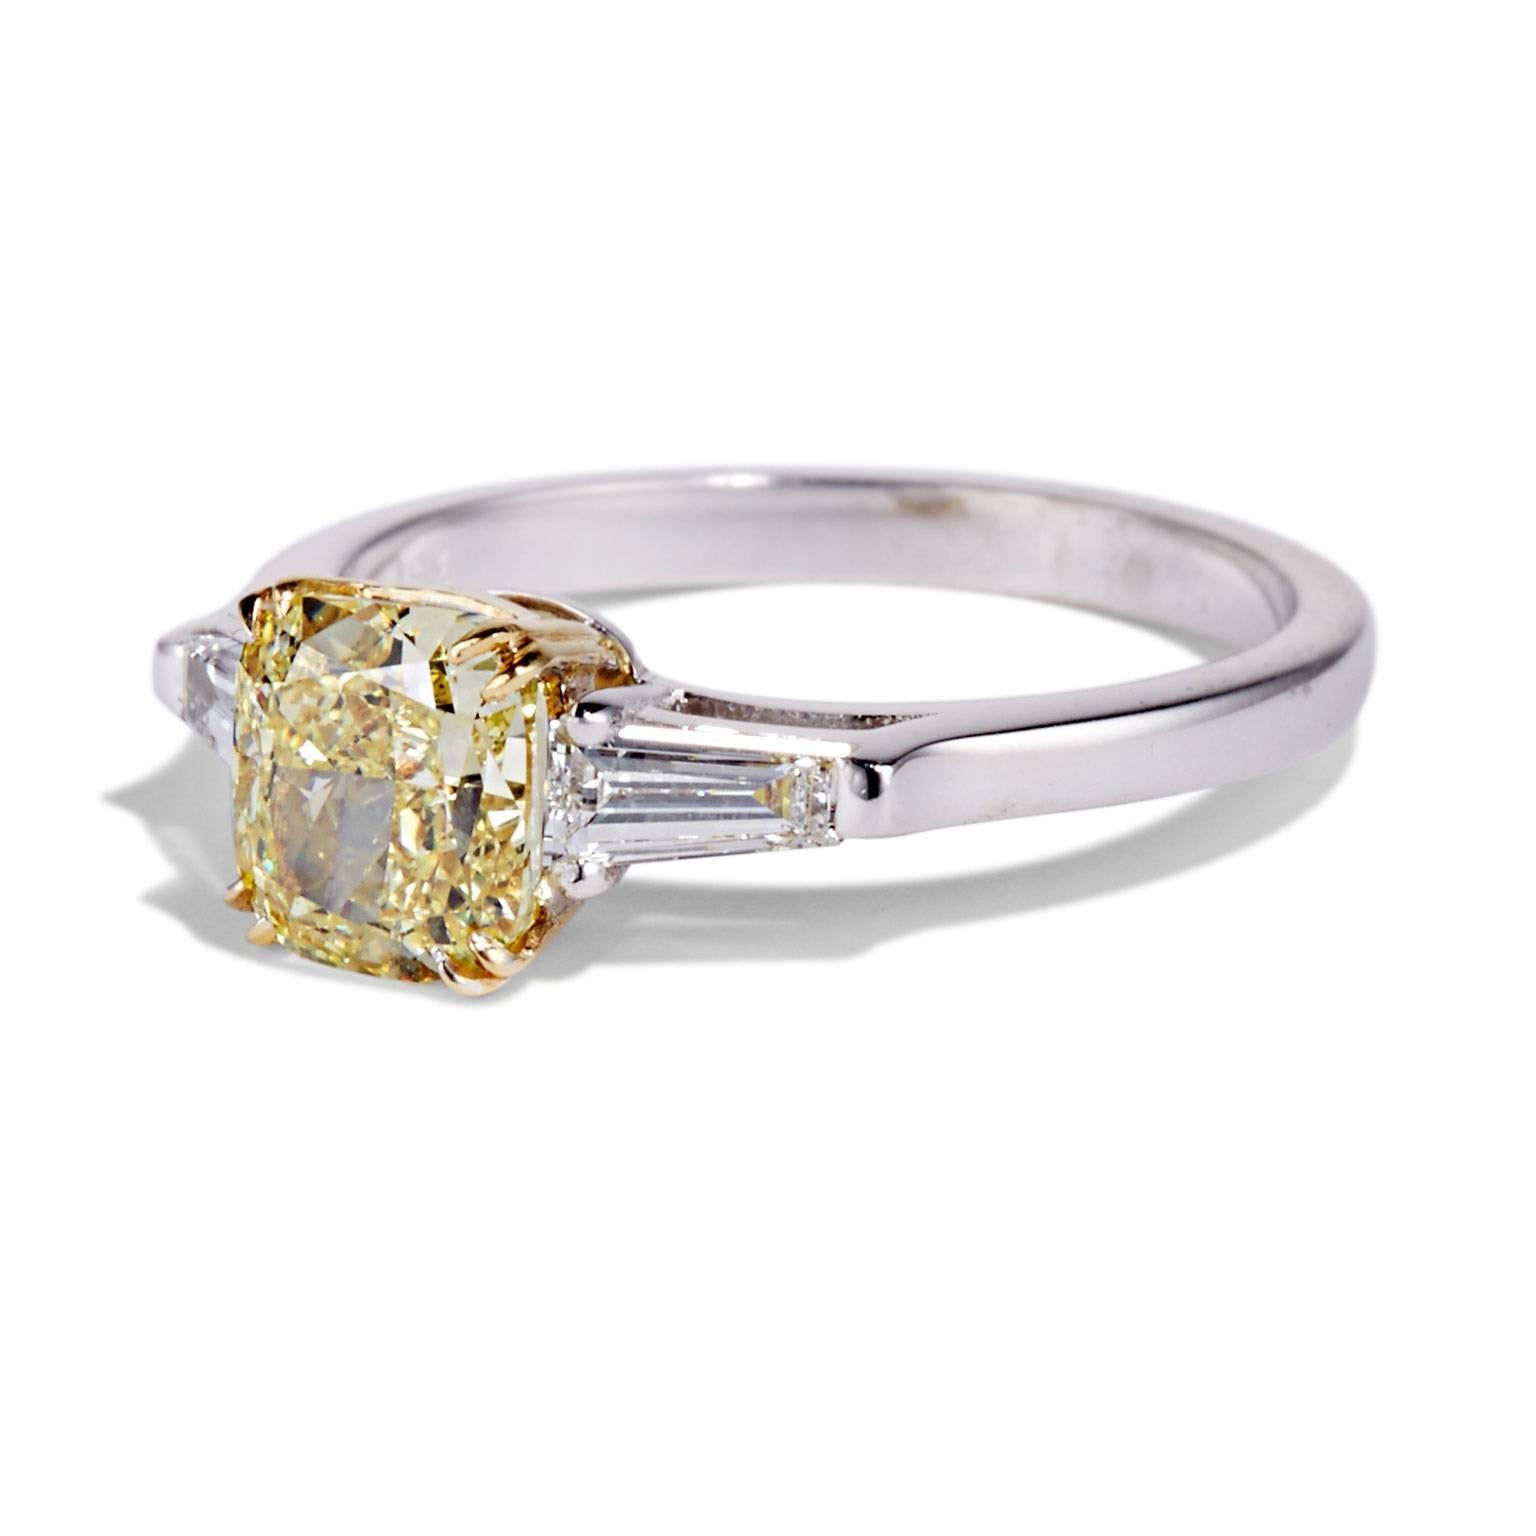 This intense yellow cushion cut diamond is flanked by two perfectly balanced tapered baguettes, angled precisely to follow the profile of the finger.
The BARBARA ring incorporates a mixture of metals with yellow gold sharp, split claw prongs